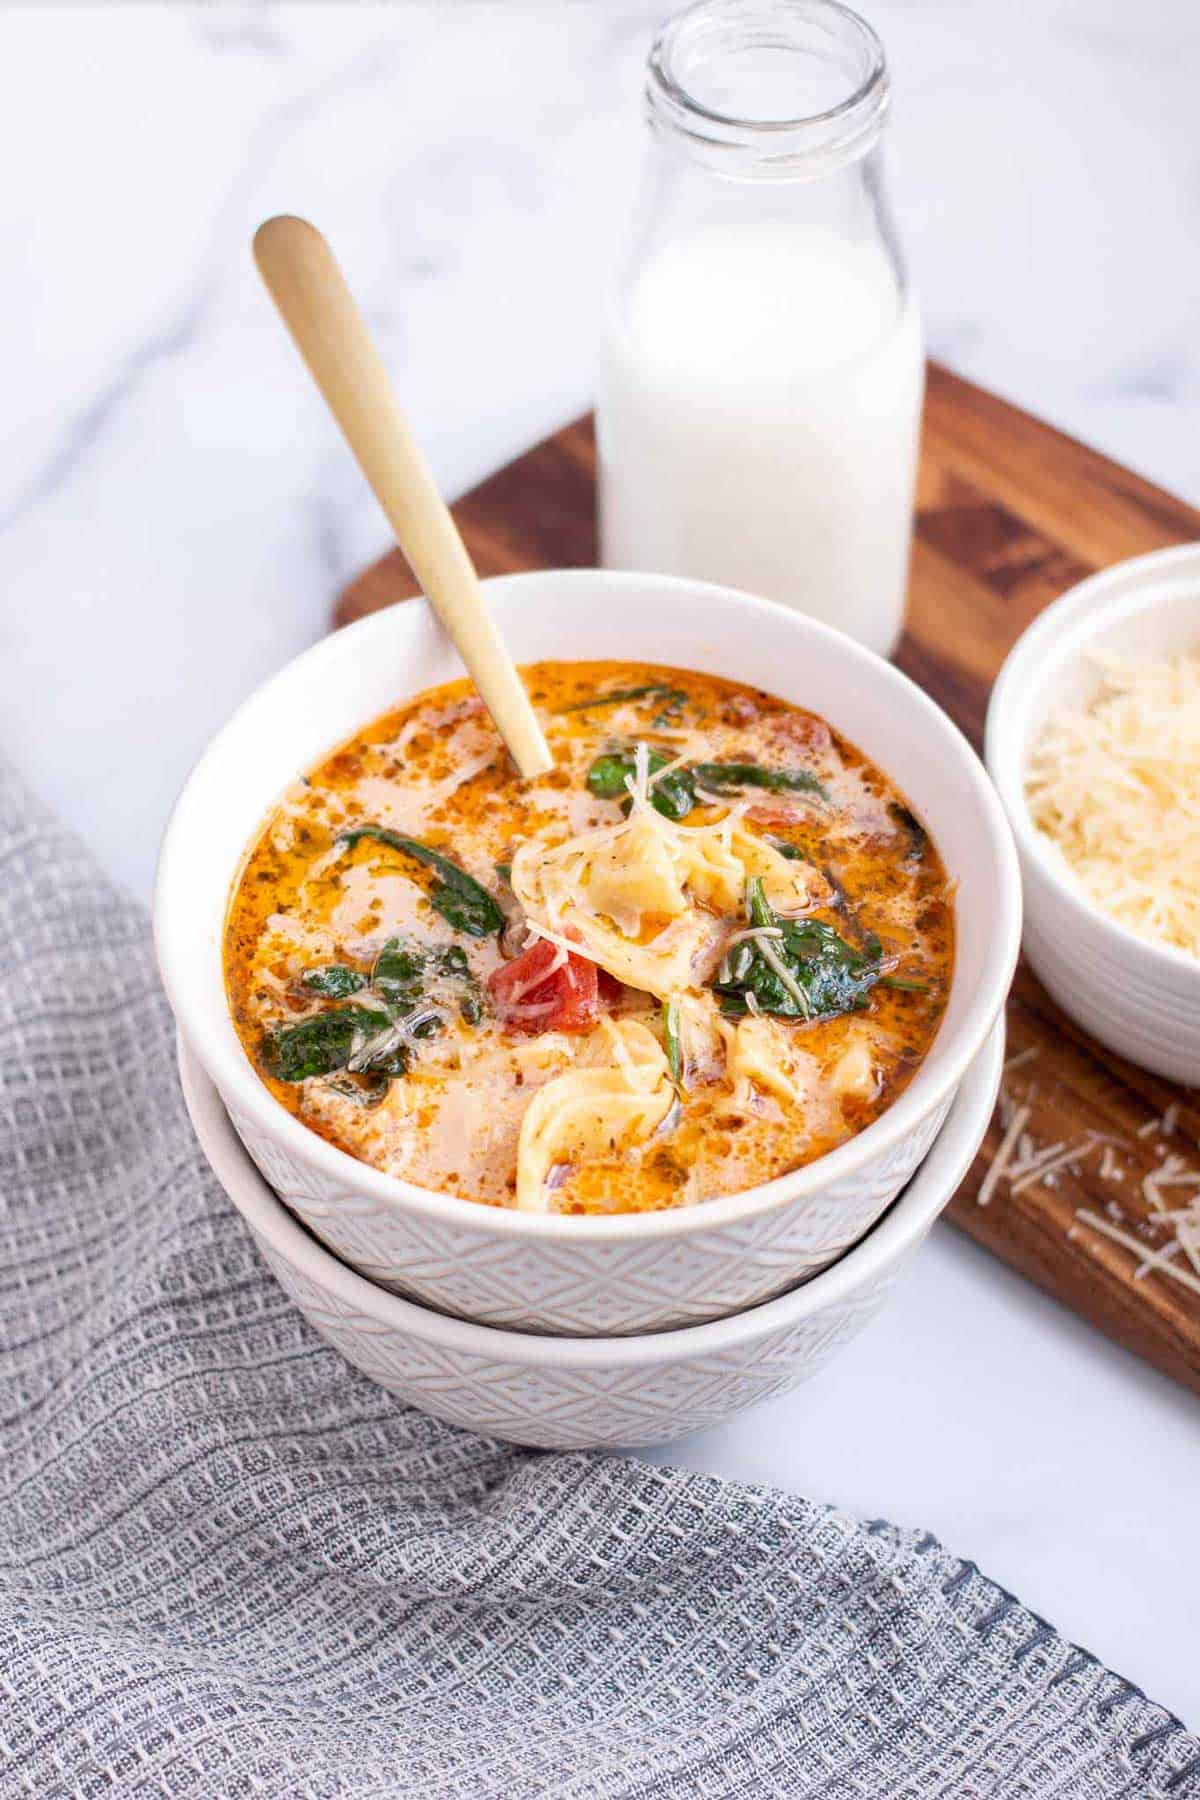 Instant Pot Tortellini Soup with tortellini, Italian sausage, and wilted baby spinach in a bowl garnished with shredded parmesan.